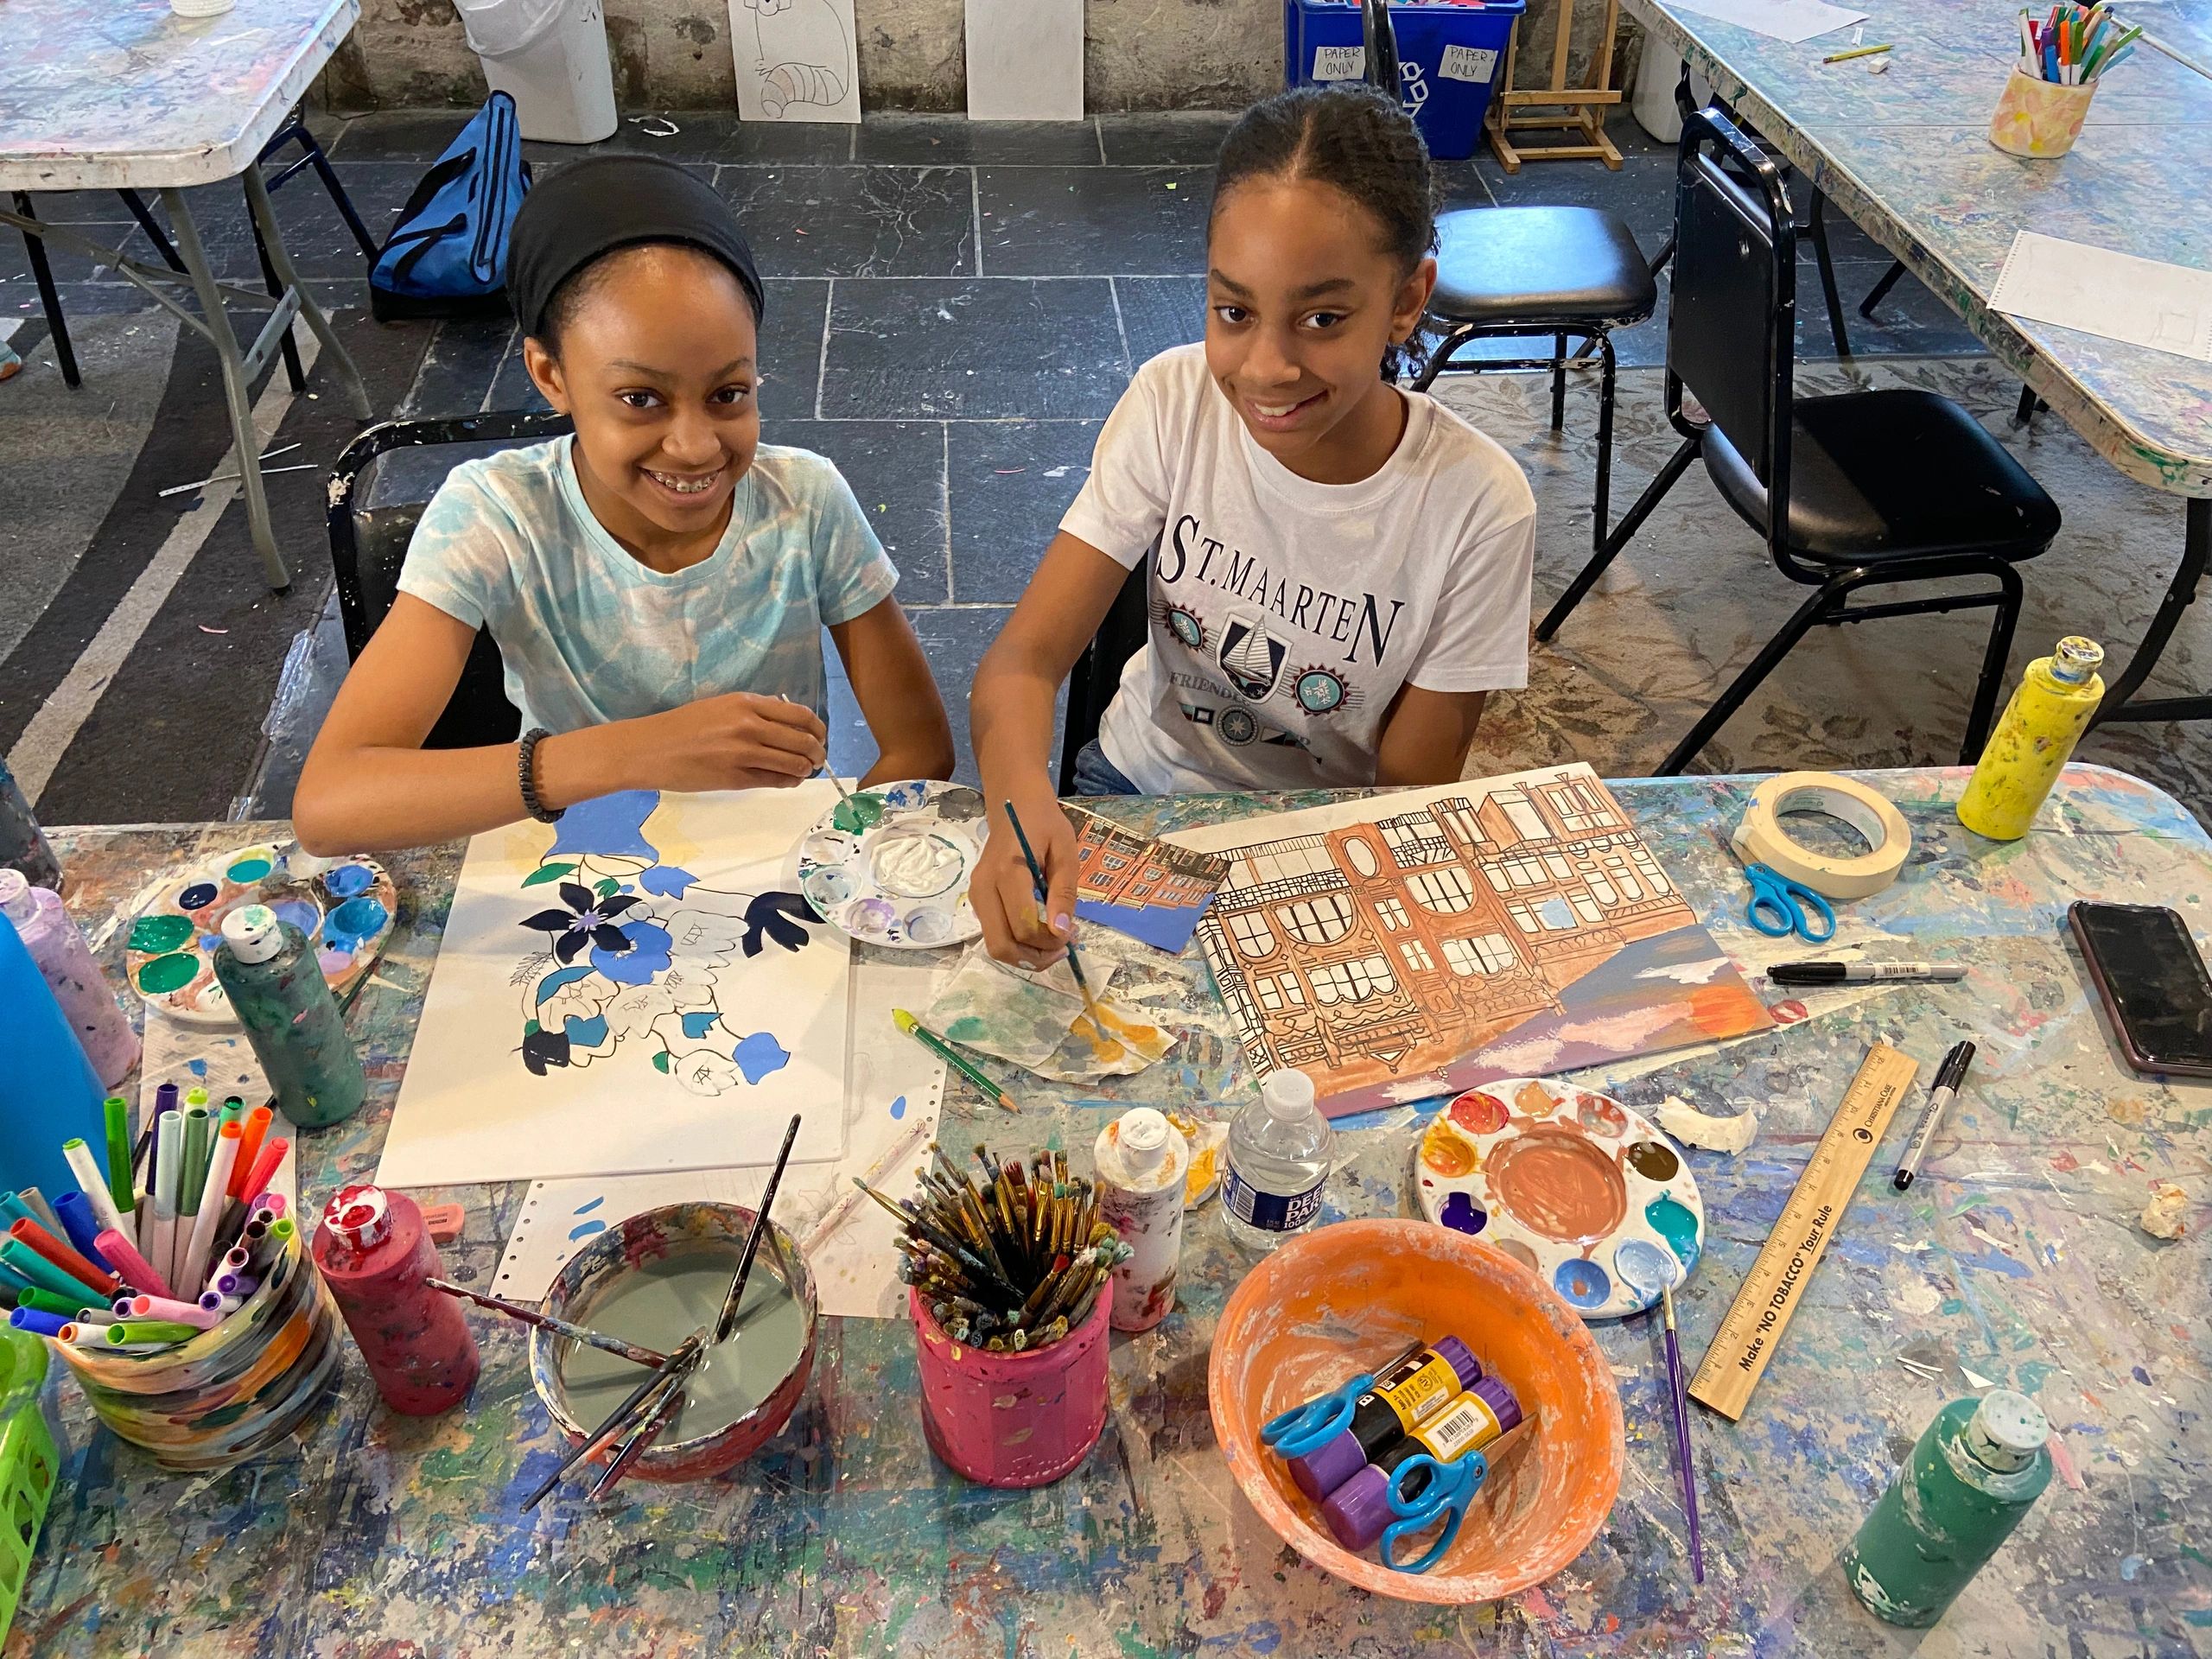 Kids Summer Art Camp, Classes & Activities - North Wales PA